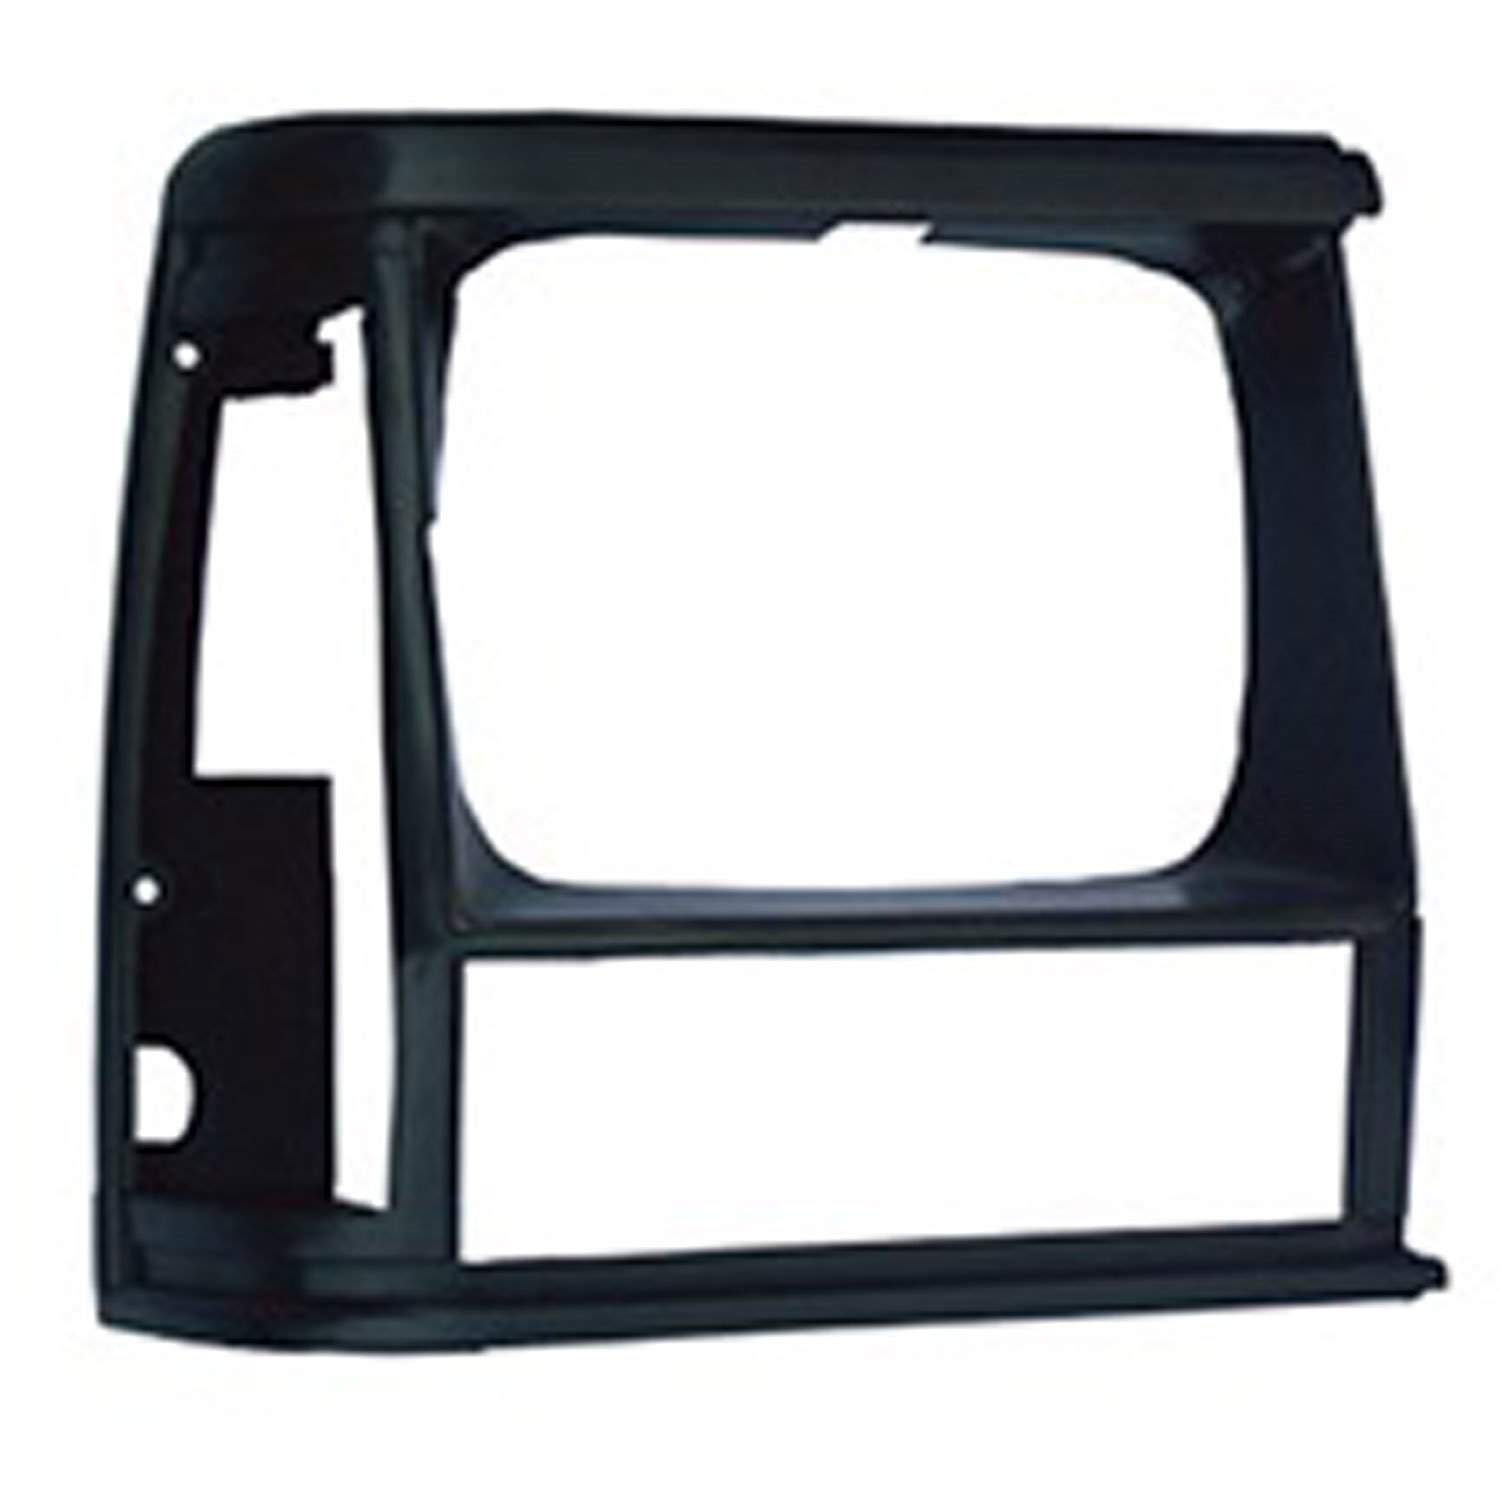 This Gray headlight bezel from Omix-ADA fits the right side on 84-90 Jeep Cherokee XJ.